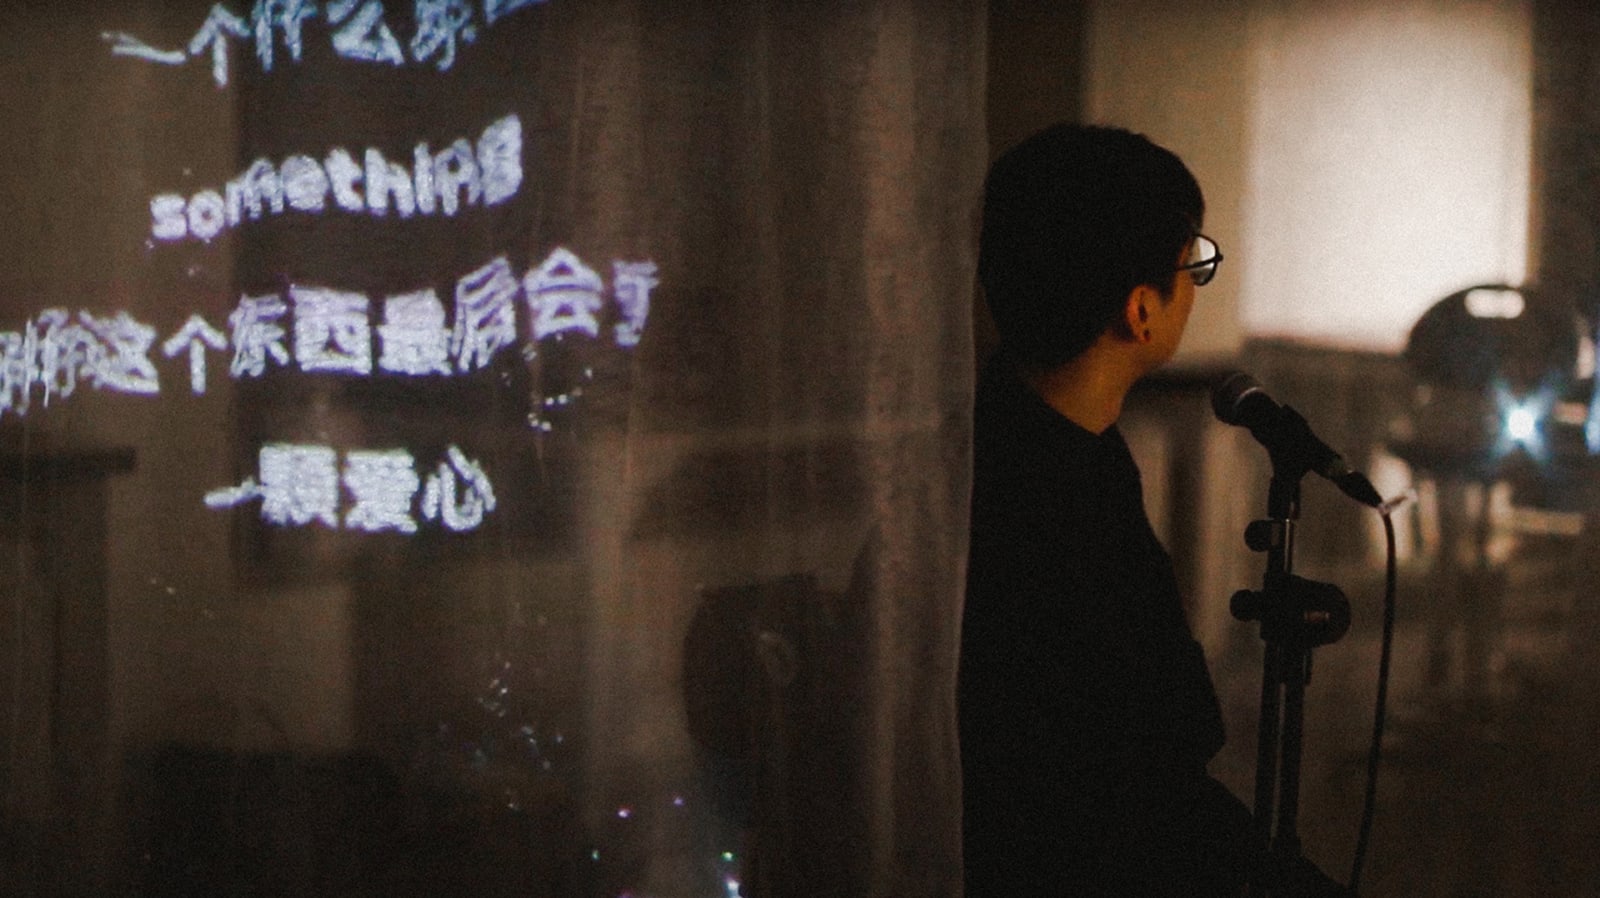 Text Translation and Projection. Participant interpreting body language